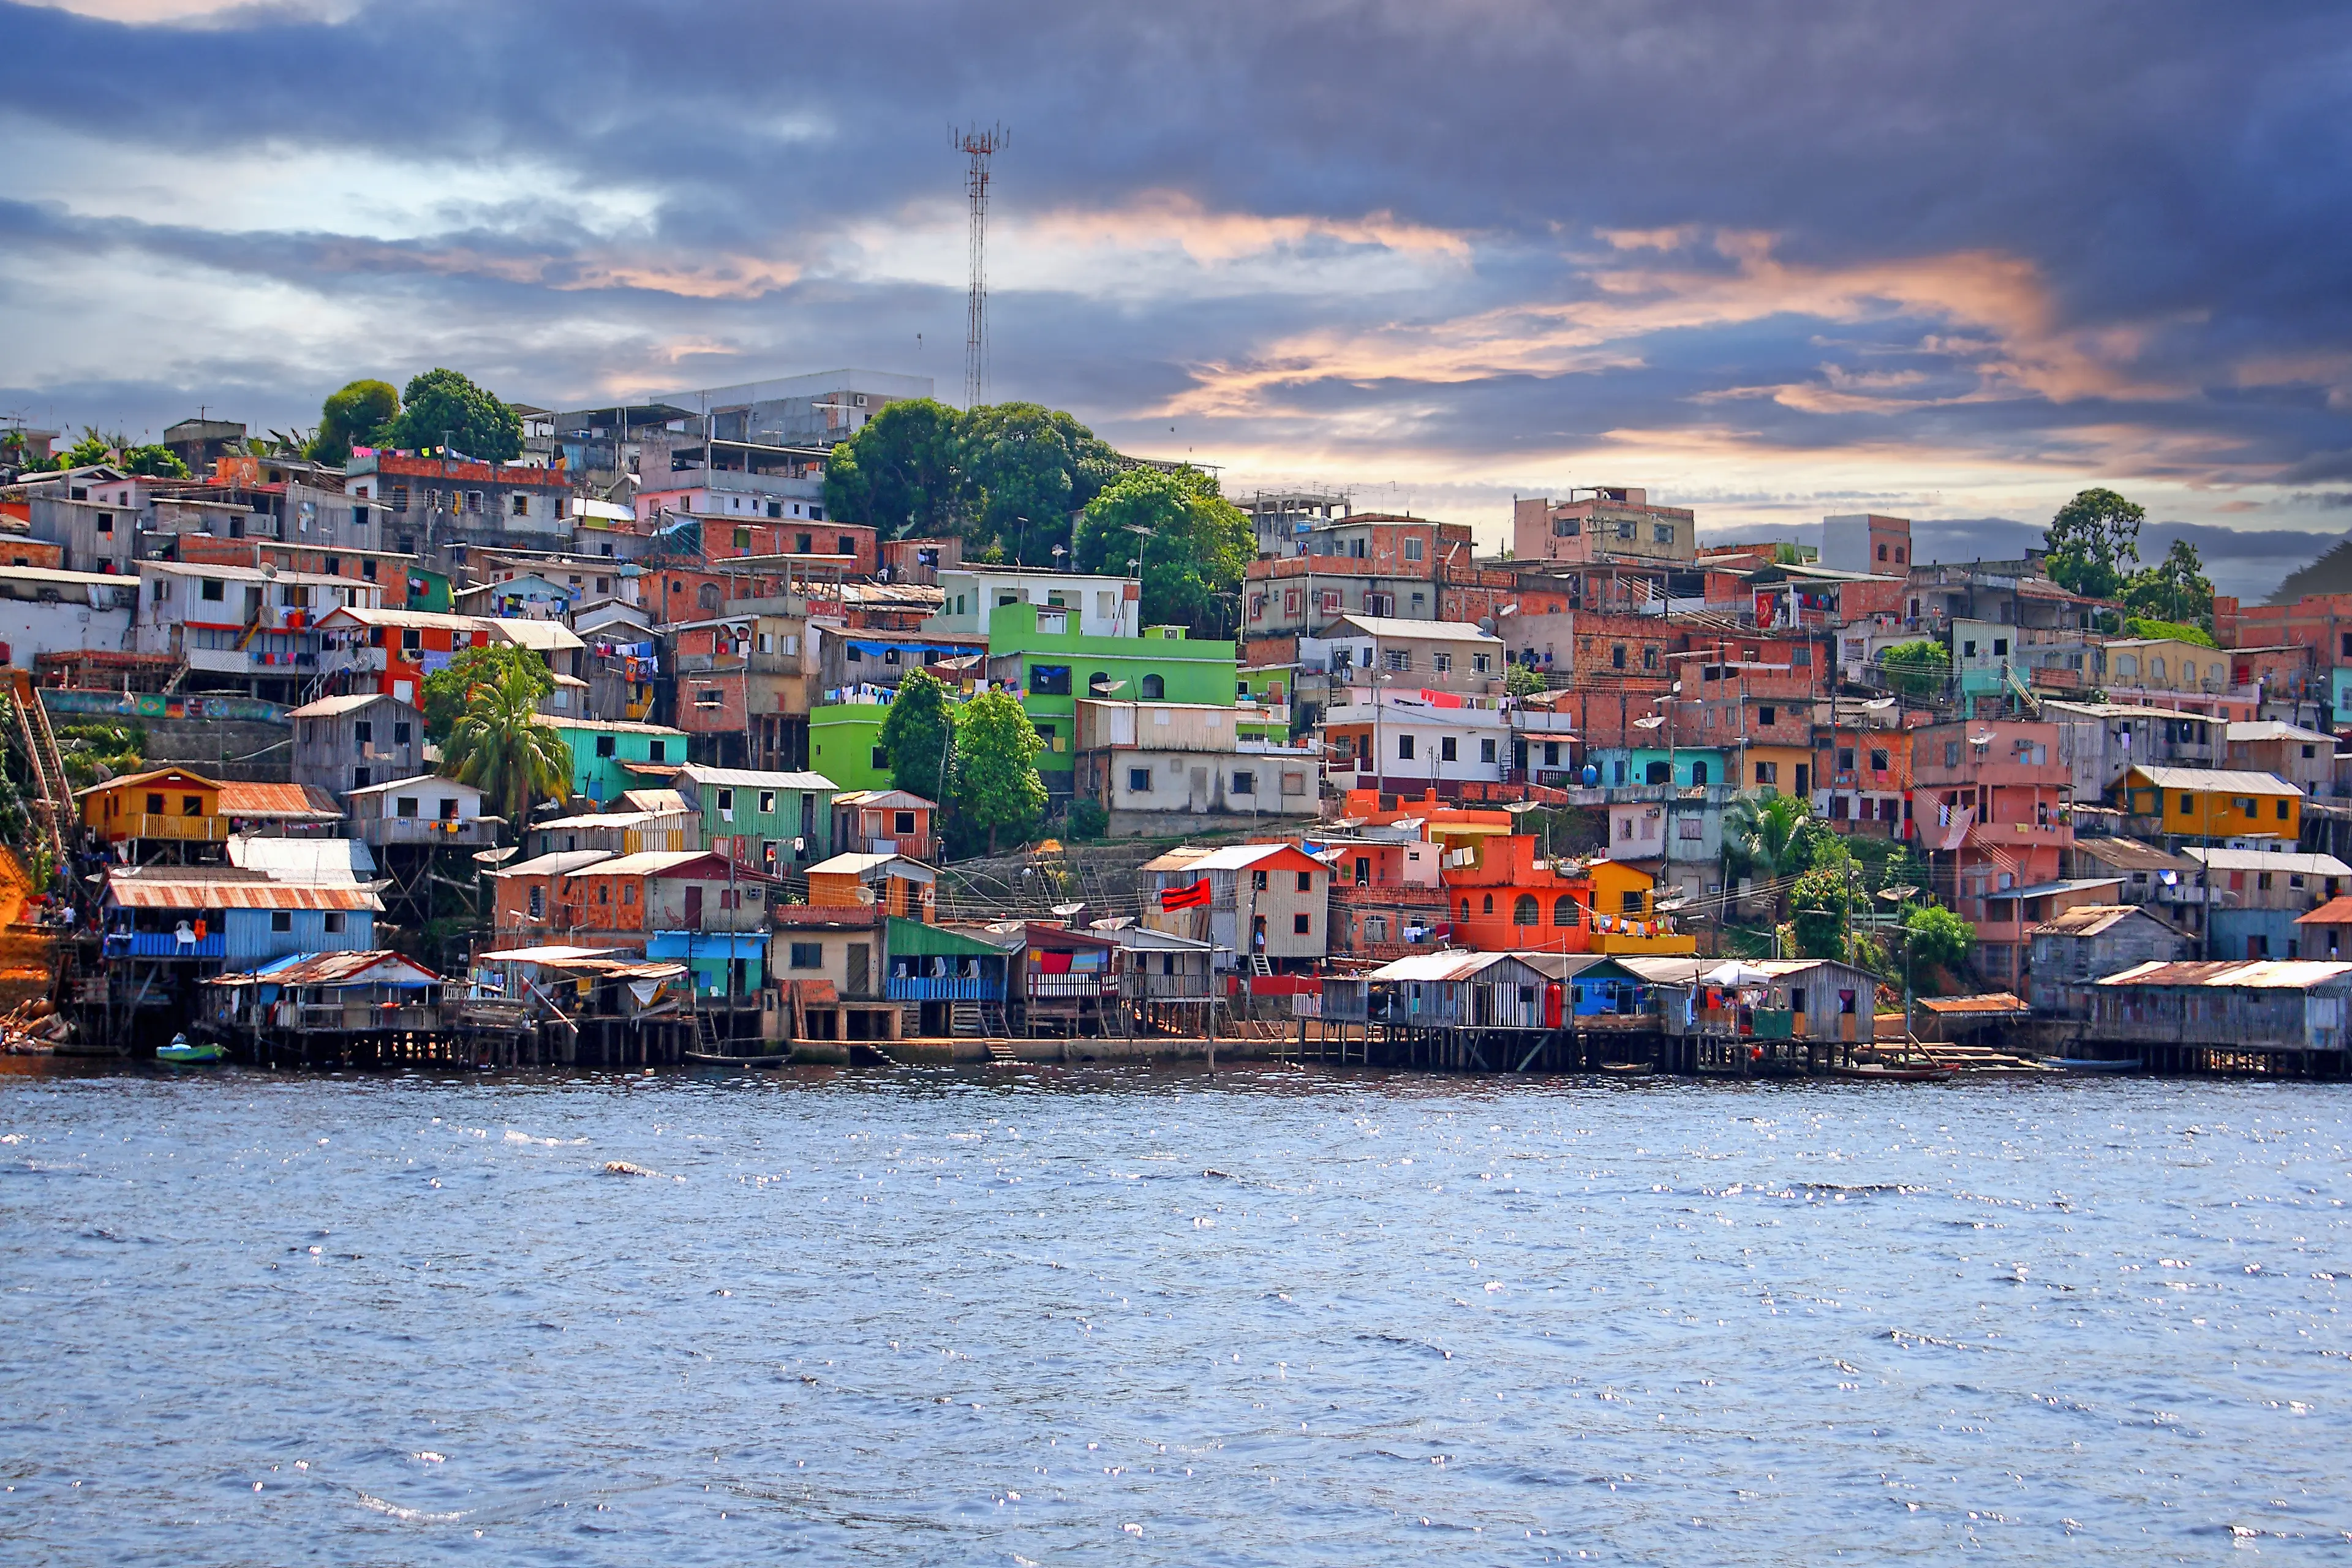 2-Day Exciting Adventure Itinerary in Manaus, Brazil